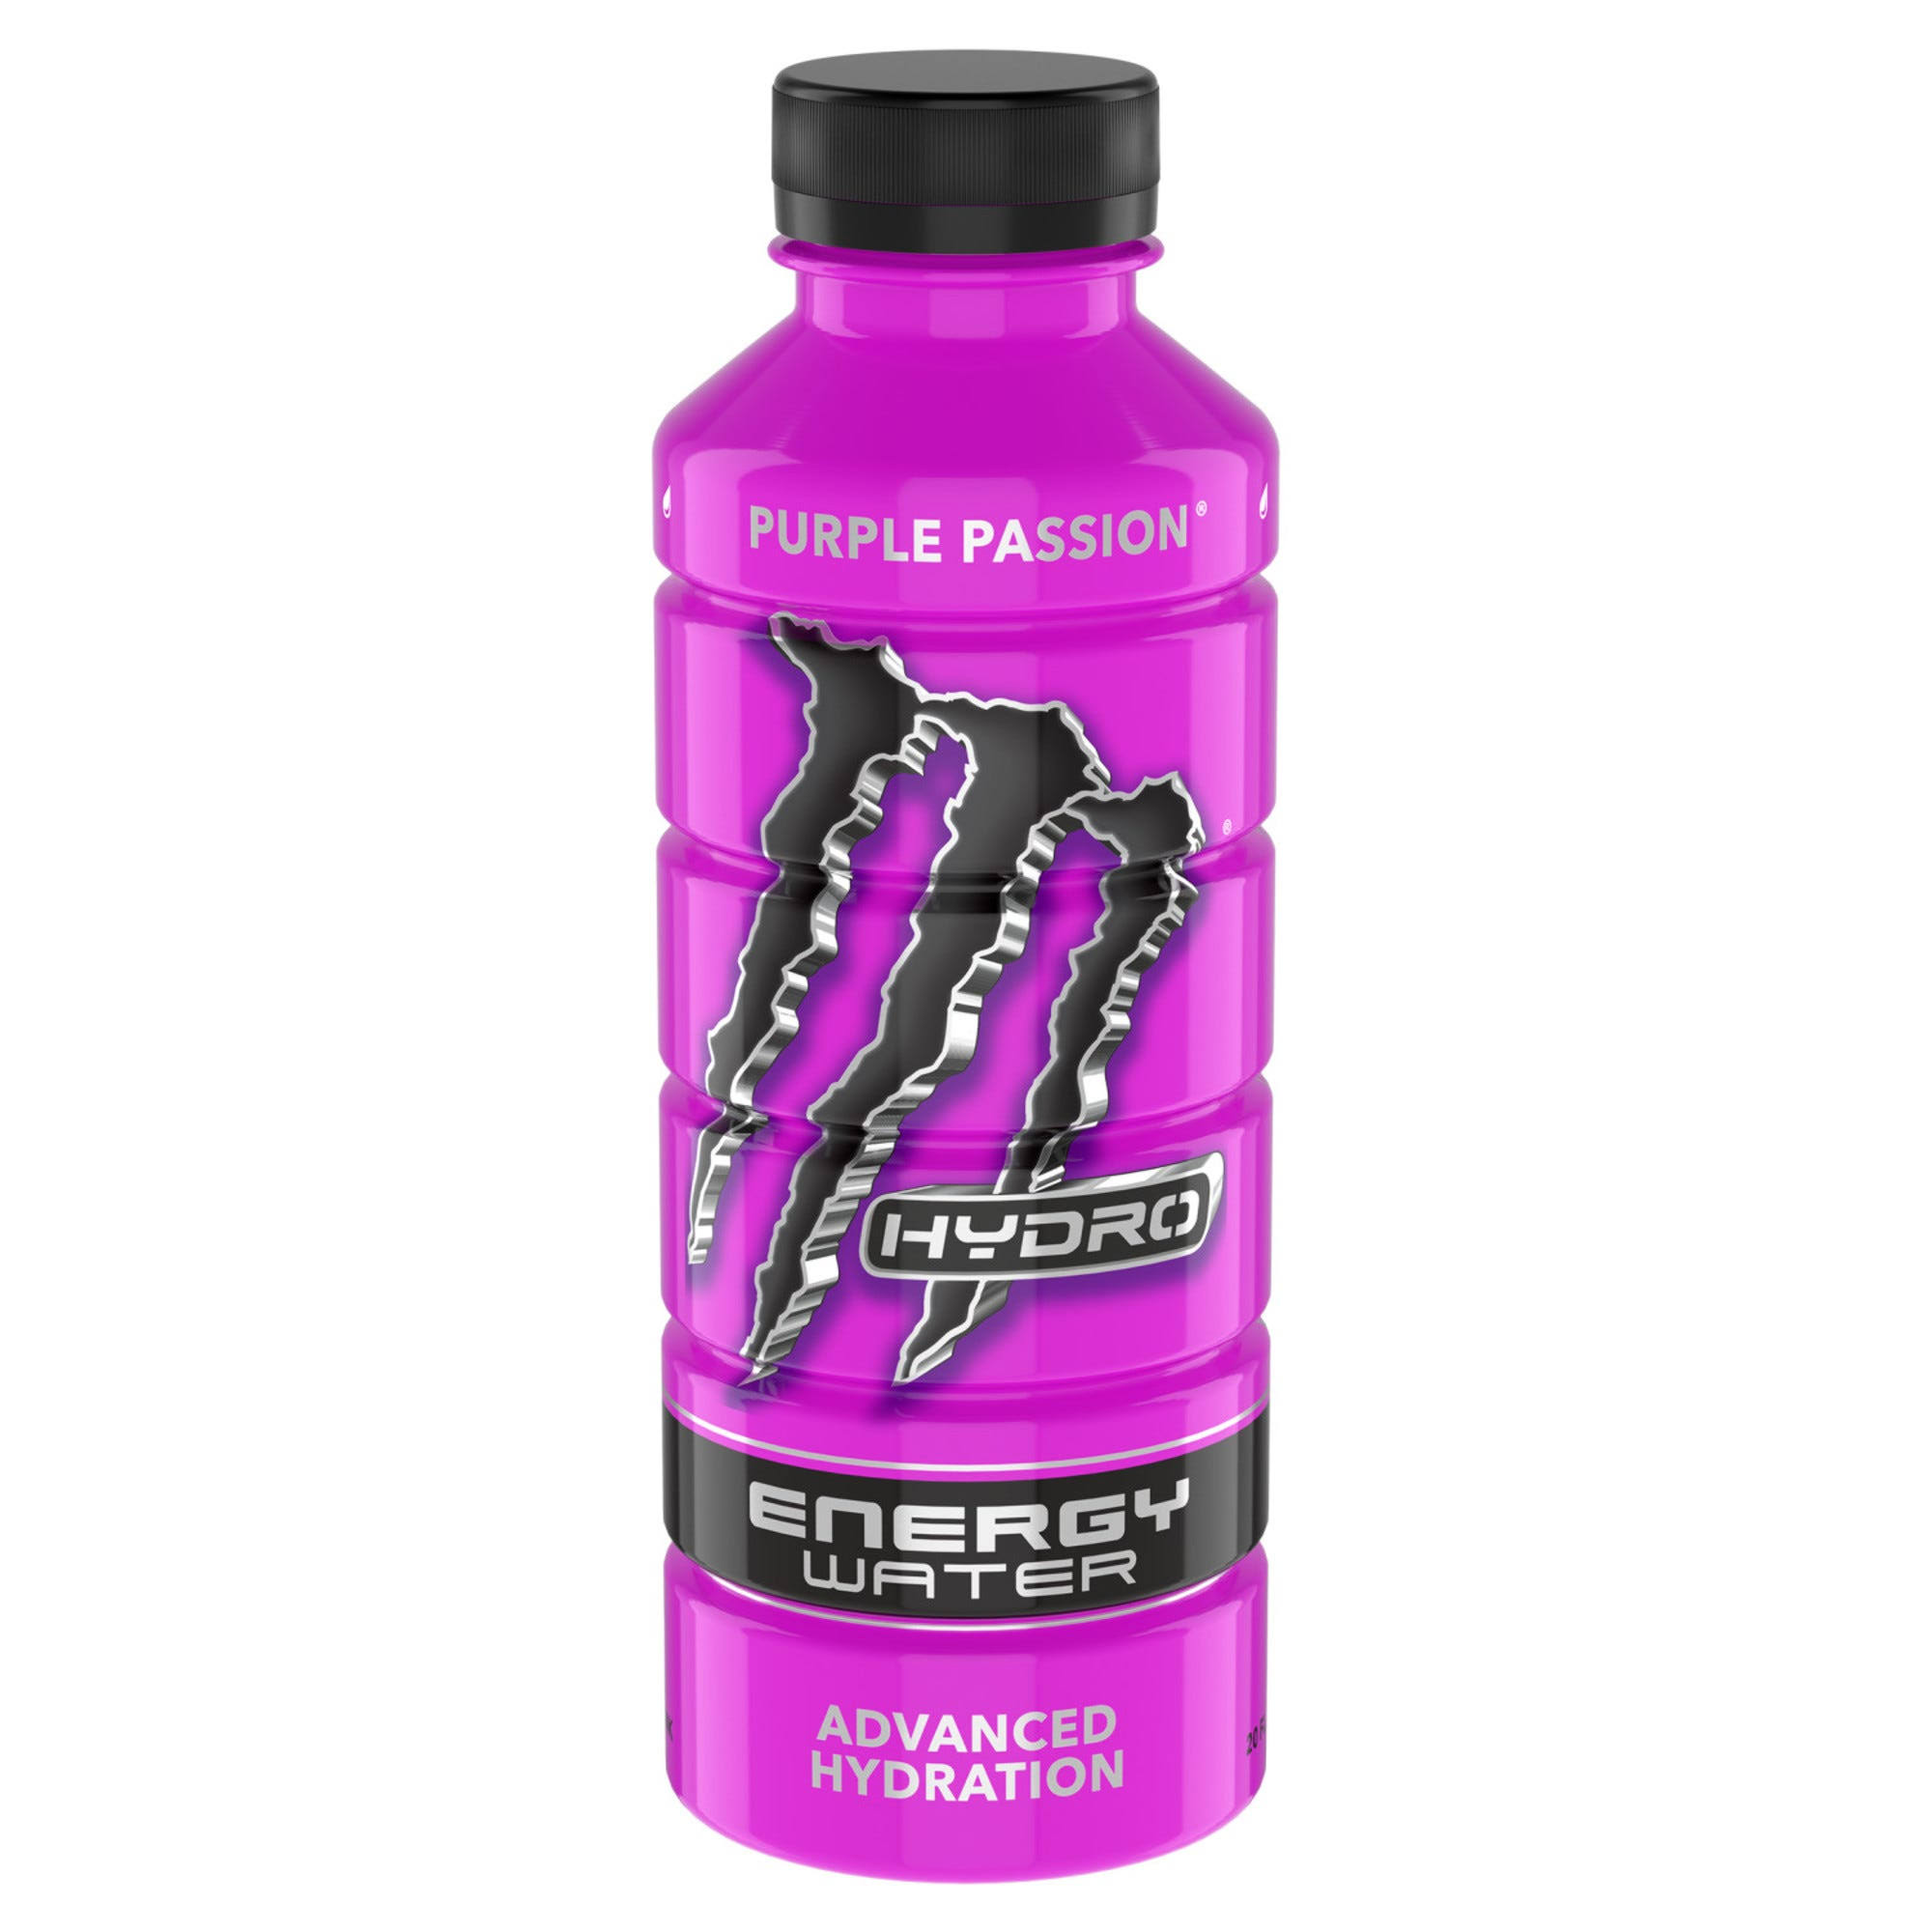 Monster Energy Water Energy Drink, Purple Passion, Advanced Hydration - 20 fl oz